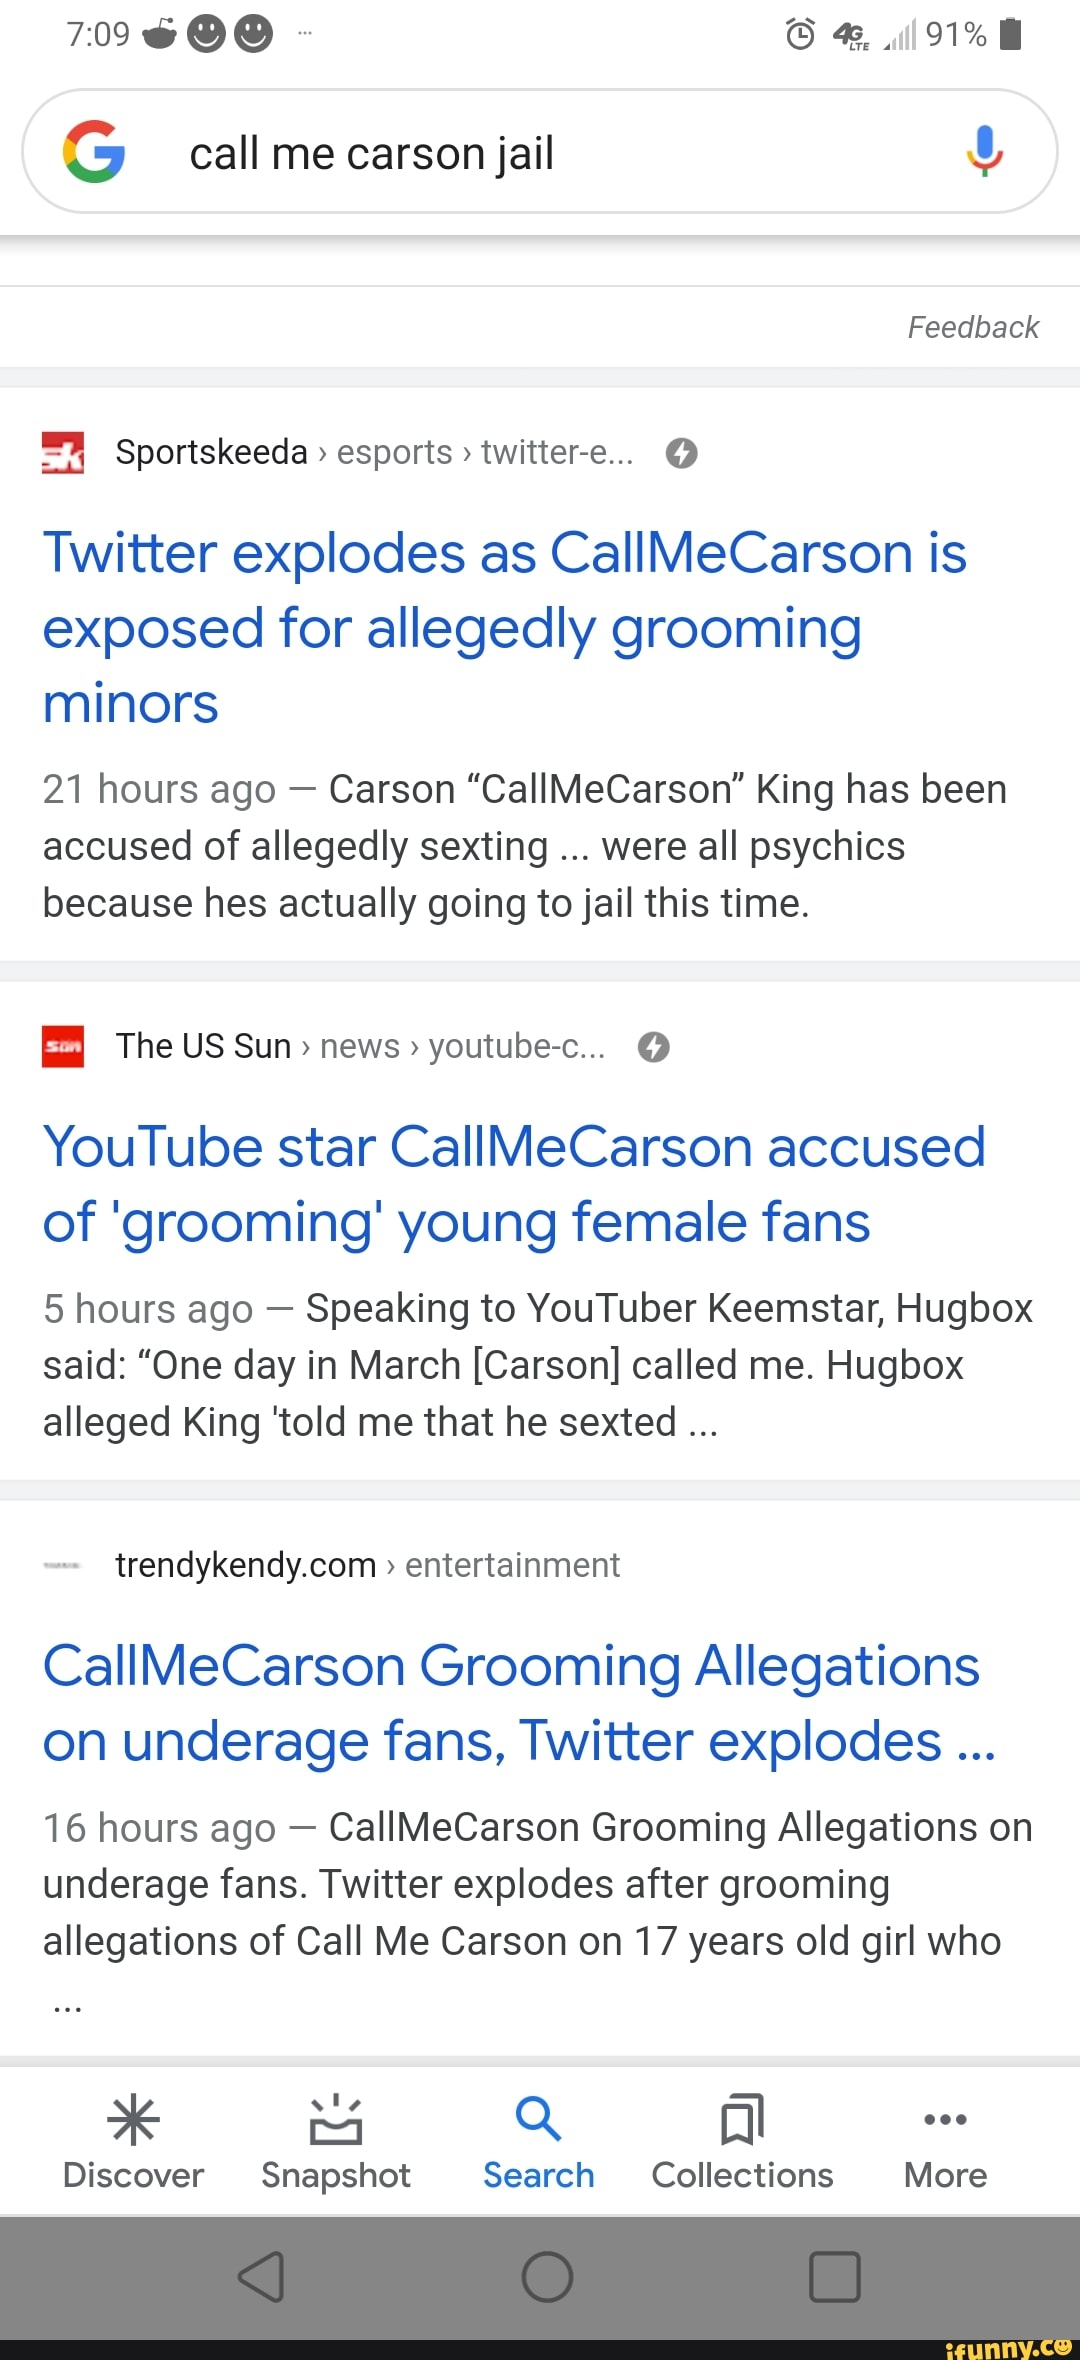 91 G Call Me Carson Jail Feedback Twitter Explodes As Callmecarson Is Exposed For Allegedly Grooming Minors 21 Hours Ago Carson Callmecarson King Has Been Accused Of Allegedly Sexting Were All